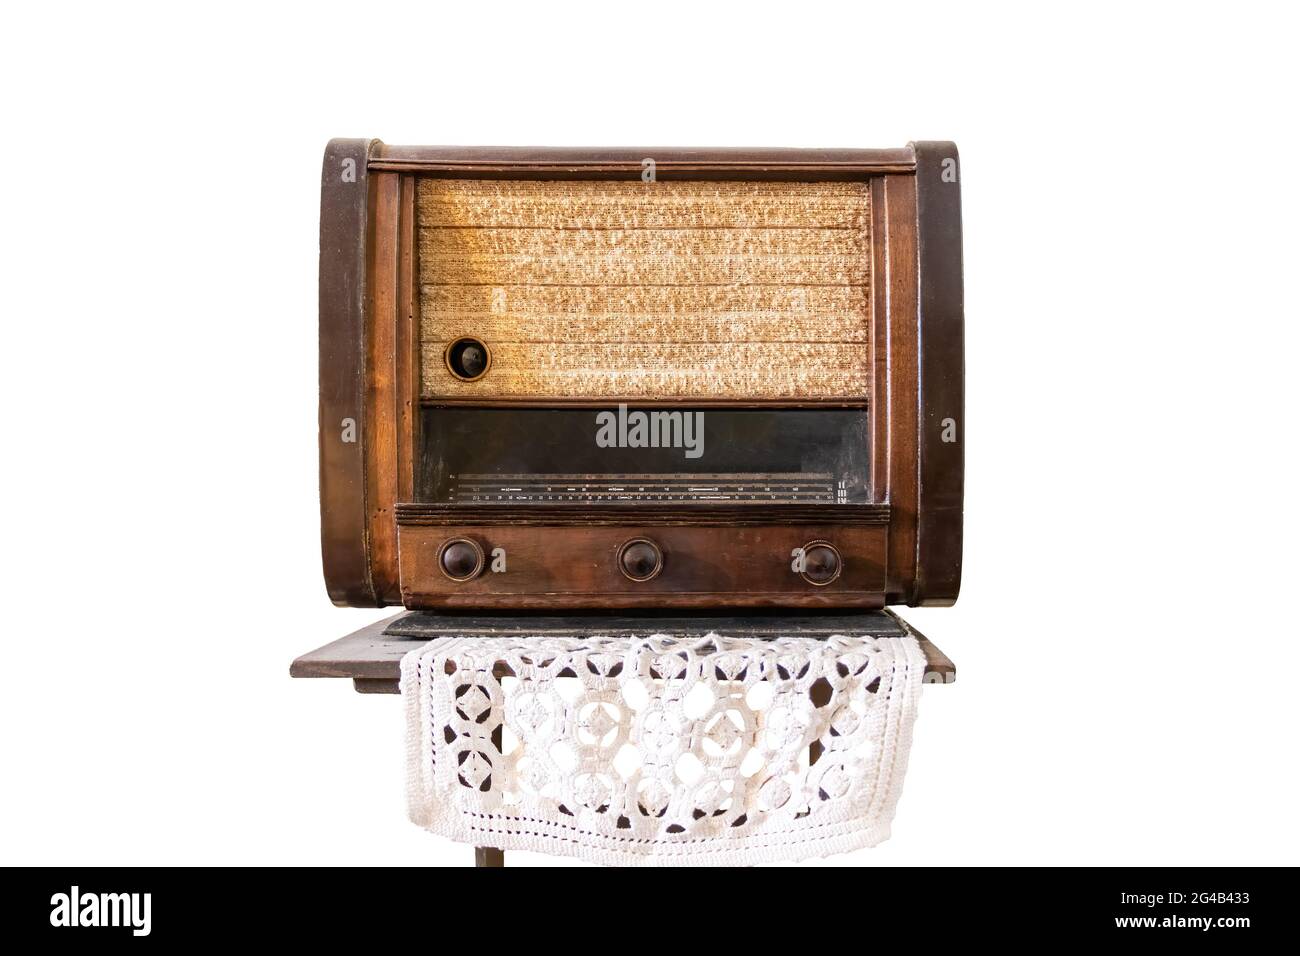 Vintage  tube radio tuner located on a wooden shelf and a cloth made of crochet Stock Photo